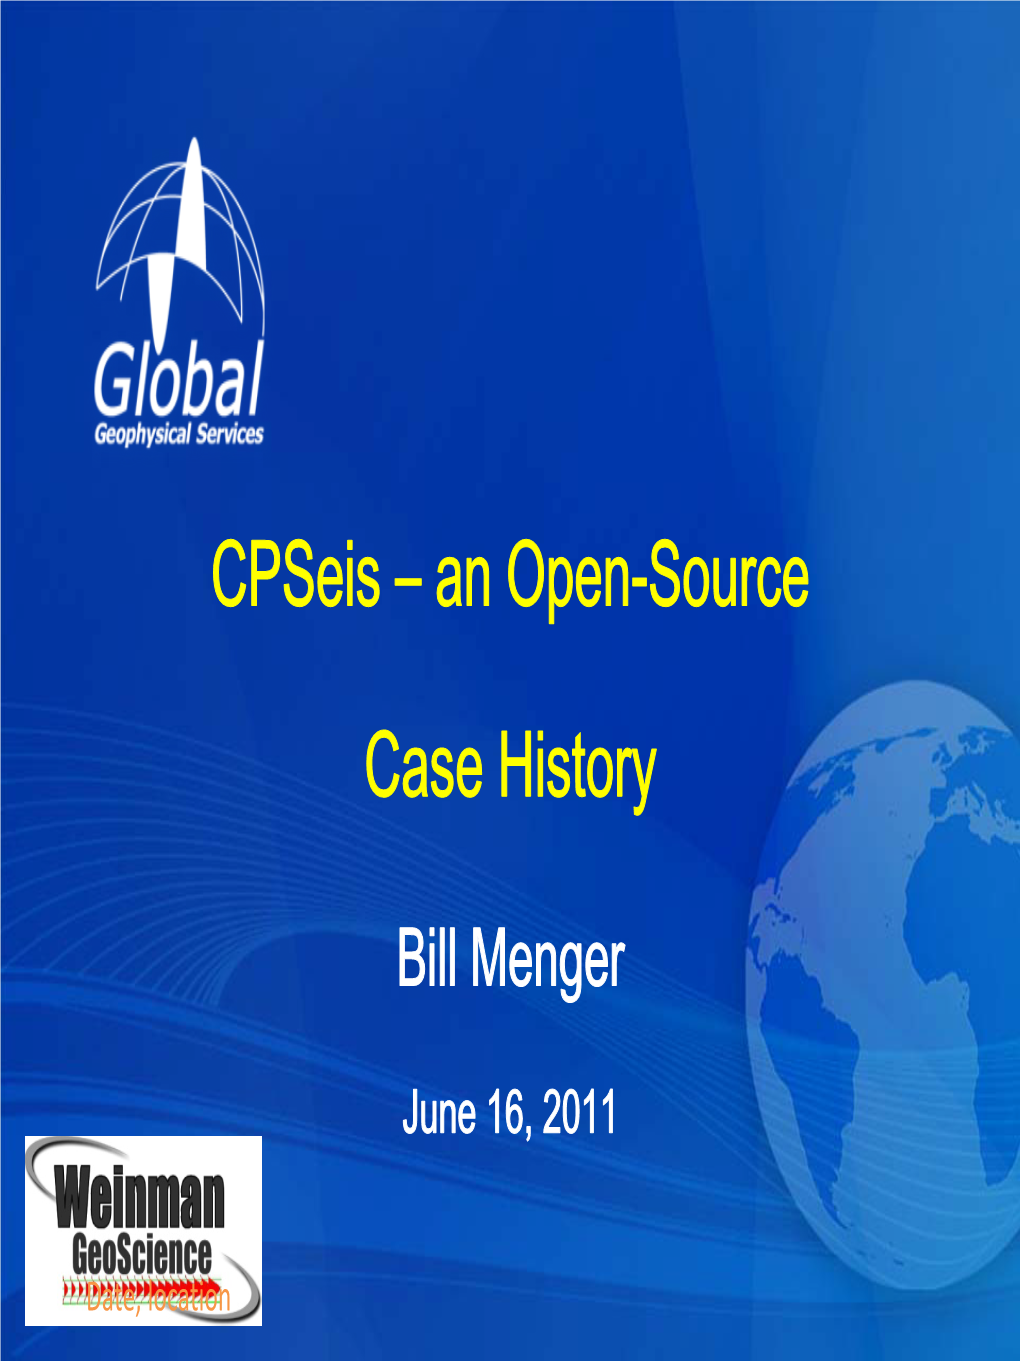 Cpseis – an Open-Source Case History